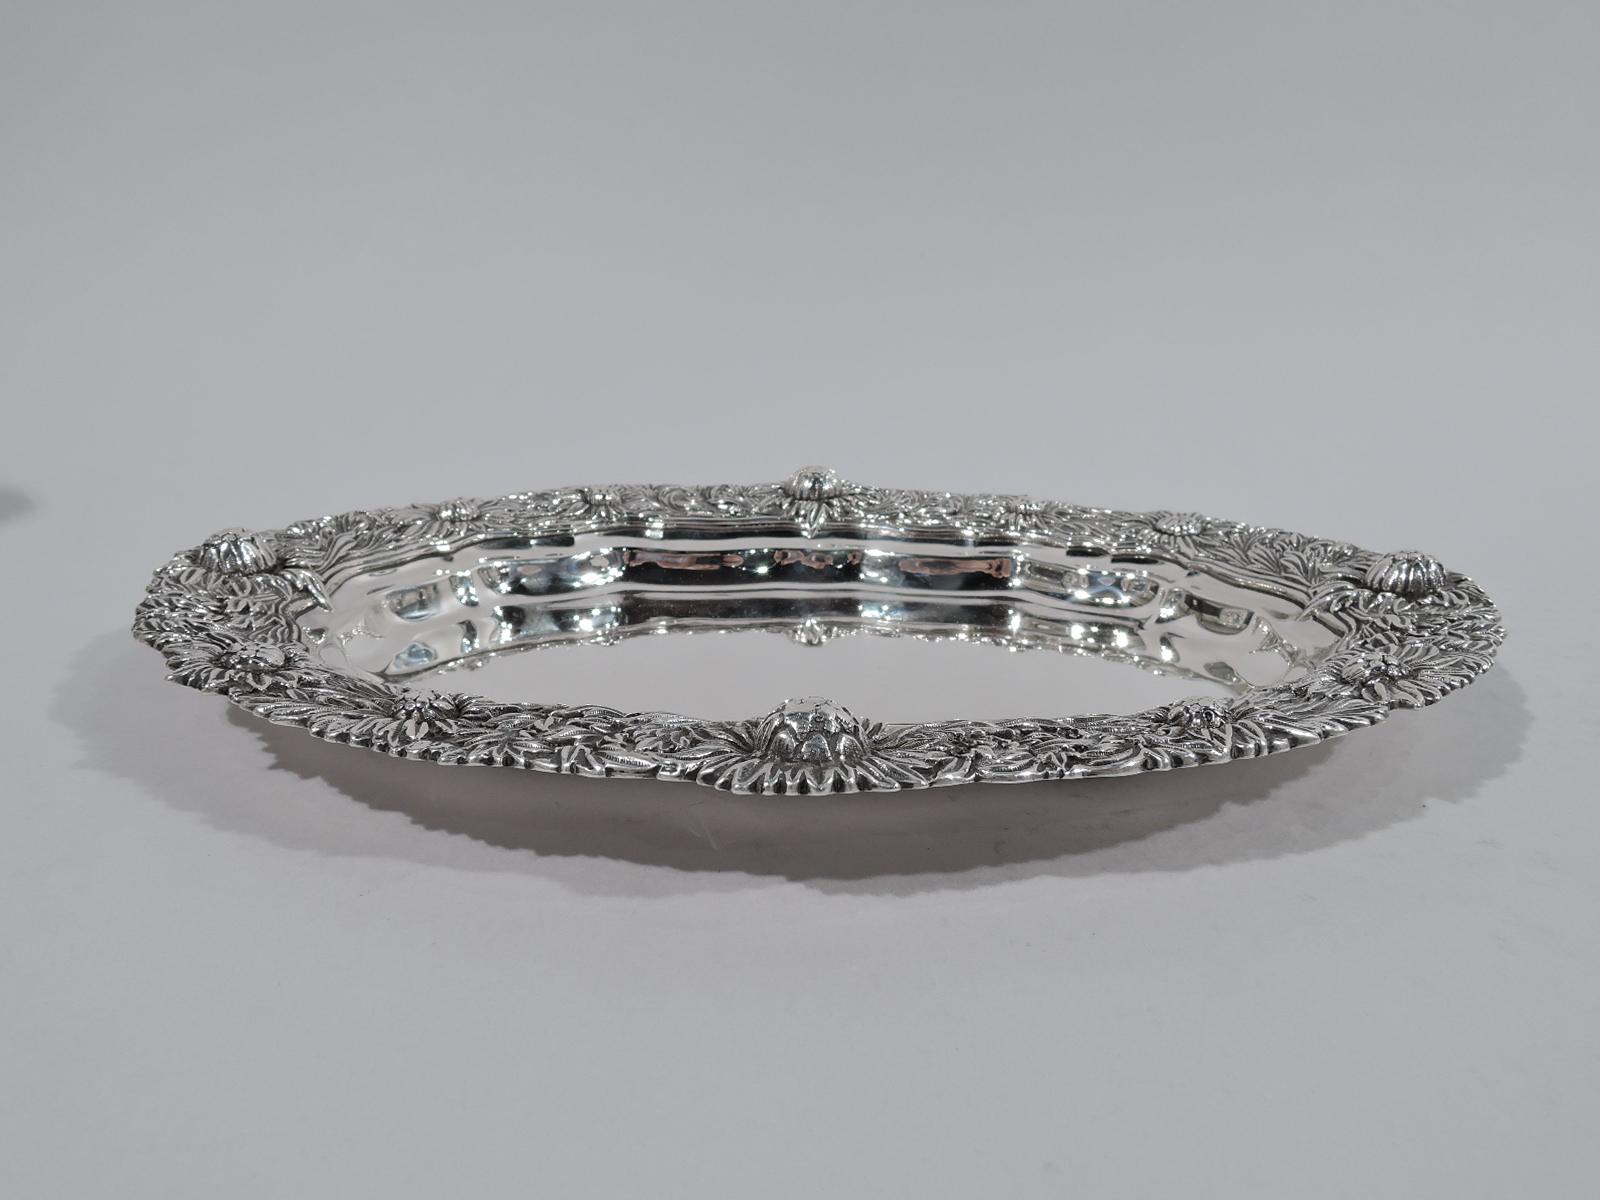 Chrysanthemum sterling silver serving platter. Shaped oval well surrounded by profusion of dense and tactile flowerheads with irregular rim. A very nice in the desirable Japonesque pattern that was introduced in 1880. Fully marked including pattern